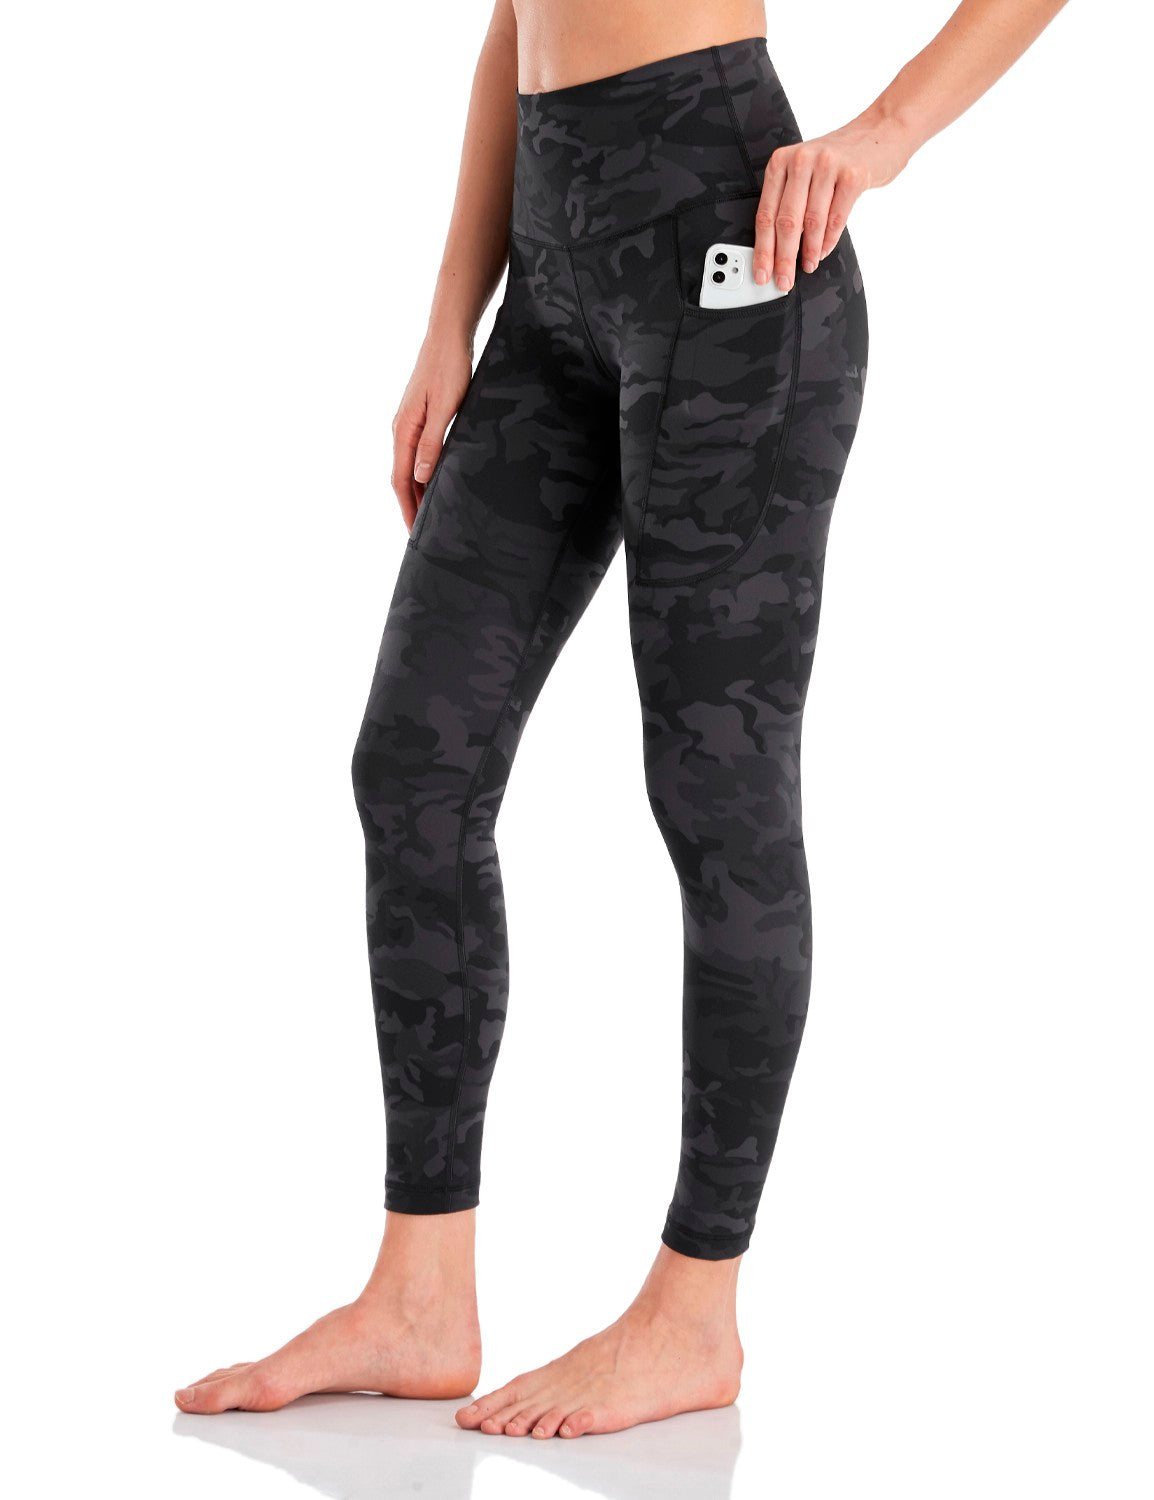 HeyNuts Hawthorn Athletic High Waisted Yoga Leggings with Side Pockets for  Women, Buttery Soft 7/8 Lenggings Tummy Control Workout Pants Black_25''  S(4/6), Black_25'', S price in UAE,  UAE